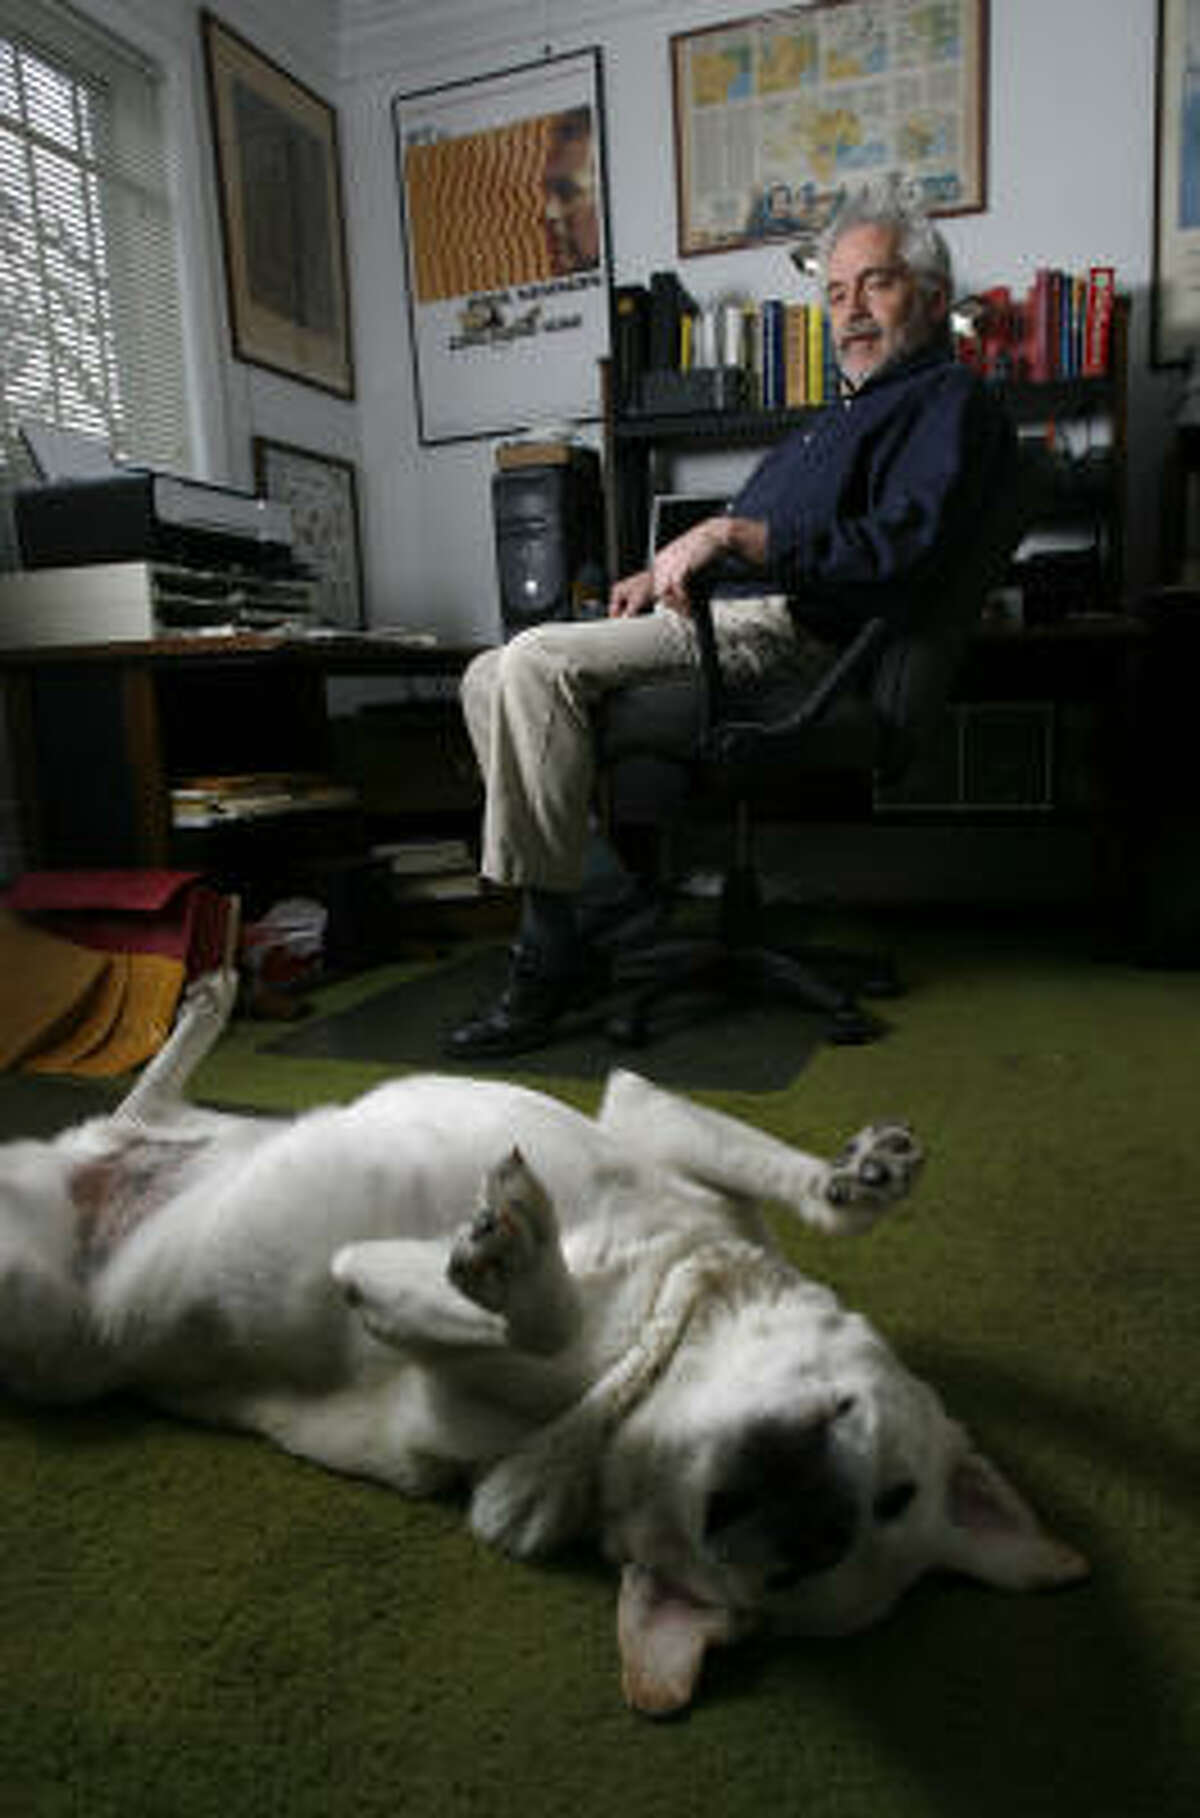 Gary Taylor, a Houstonian who ﻿self-published his book, Luggage by Kroger: A True-Crime Memoir, hangs out with his dog, Shane, at his home, where much of his book was written.﻿